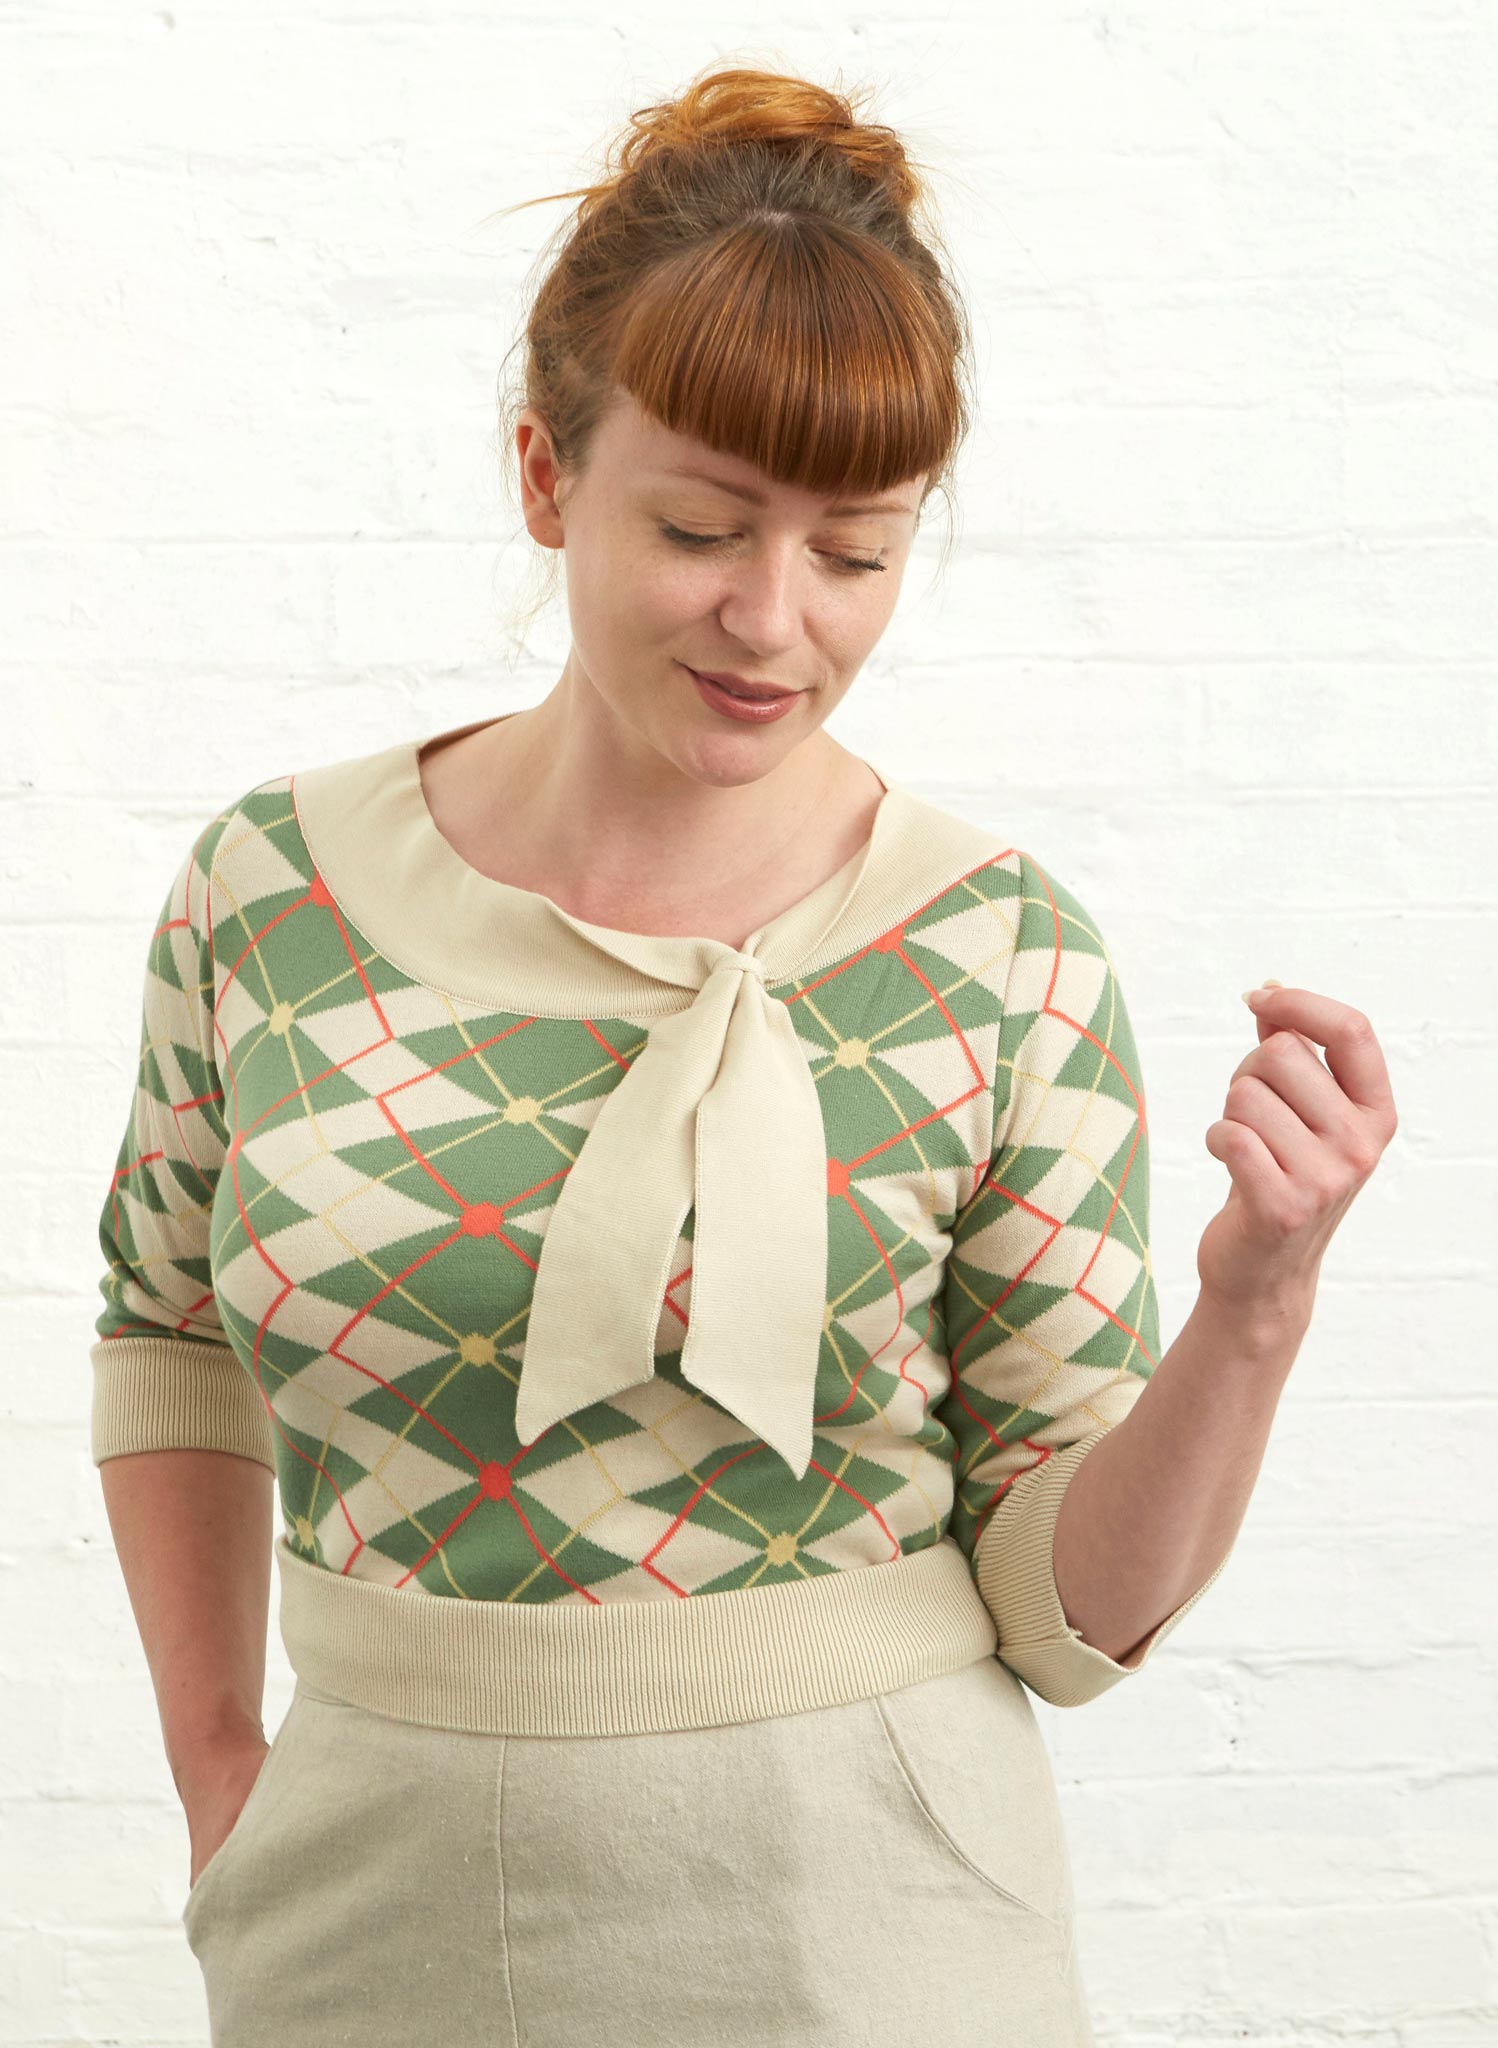 Palava Amelie Knitted top in Green / Cream Argyle - Organic Cotton